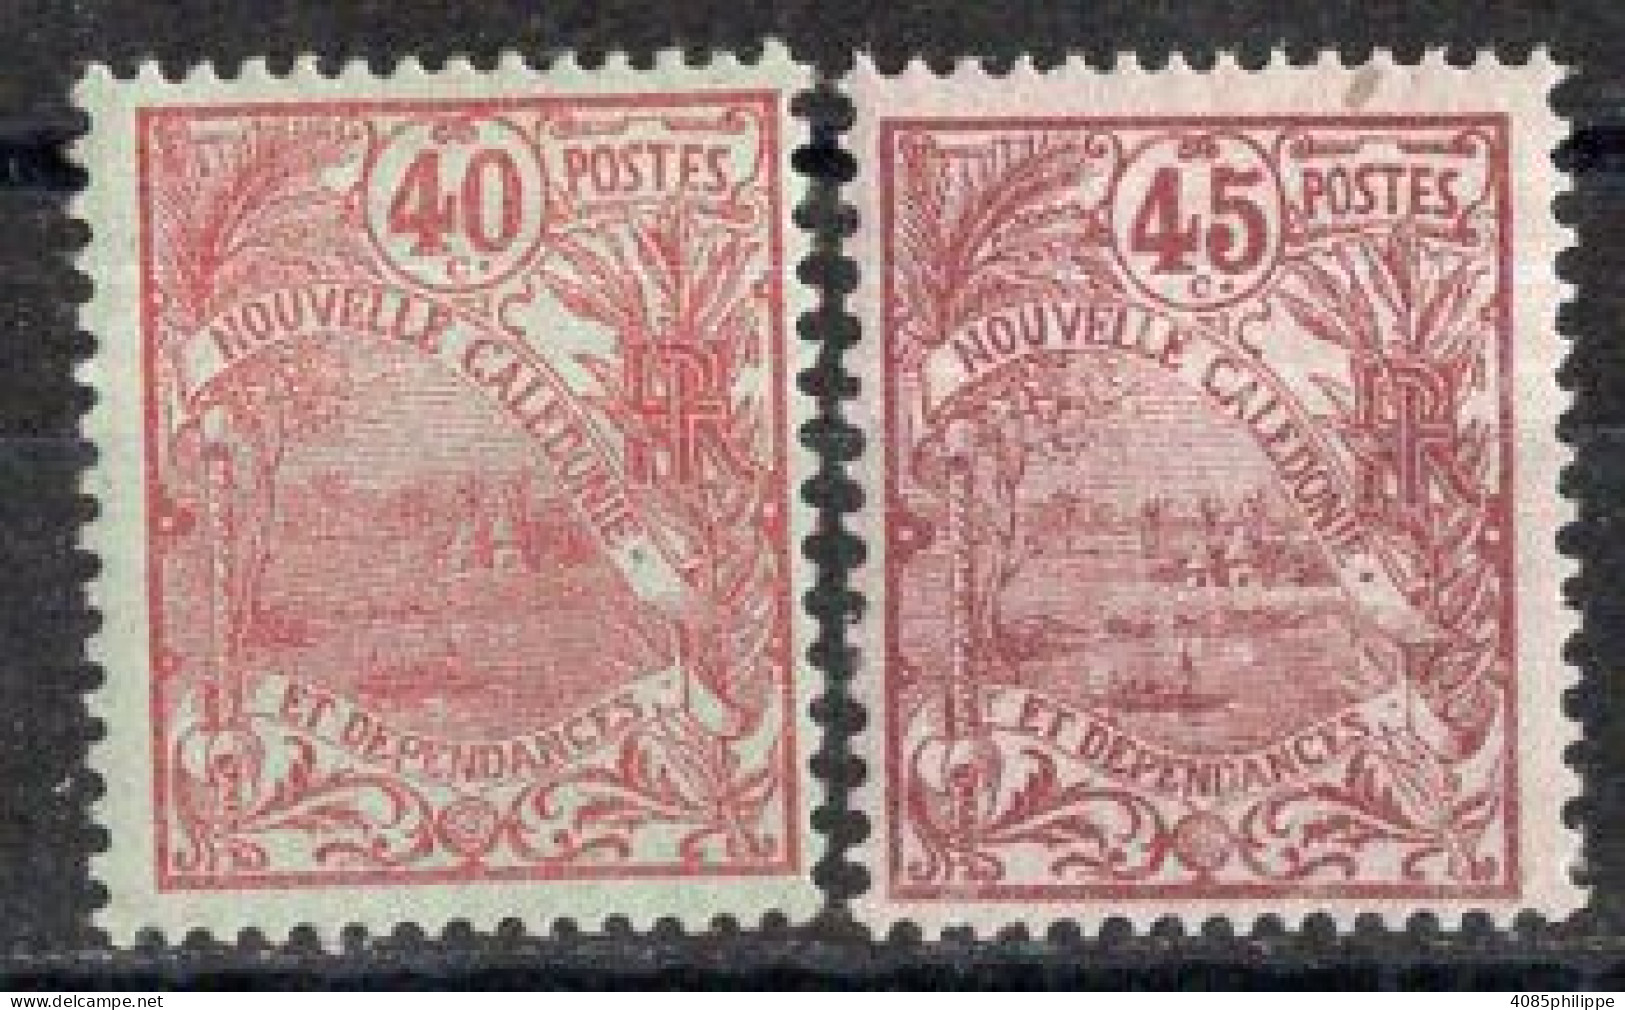 Nvelle CALEDONIE Timbres-Poste N°98*& 99* Neufs Charnières TB Cote : 2€75 - Unused Stamps